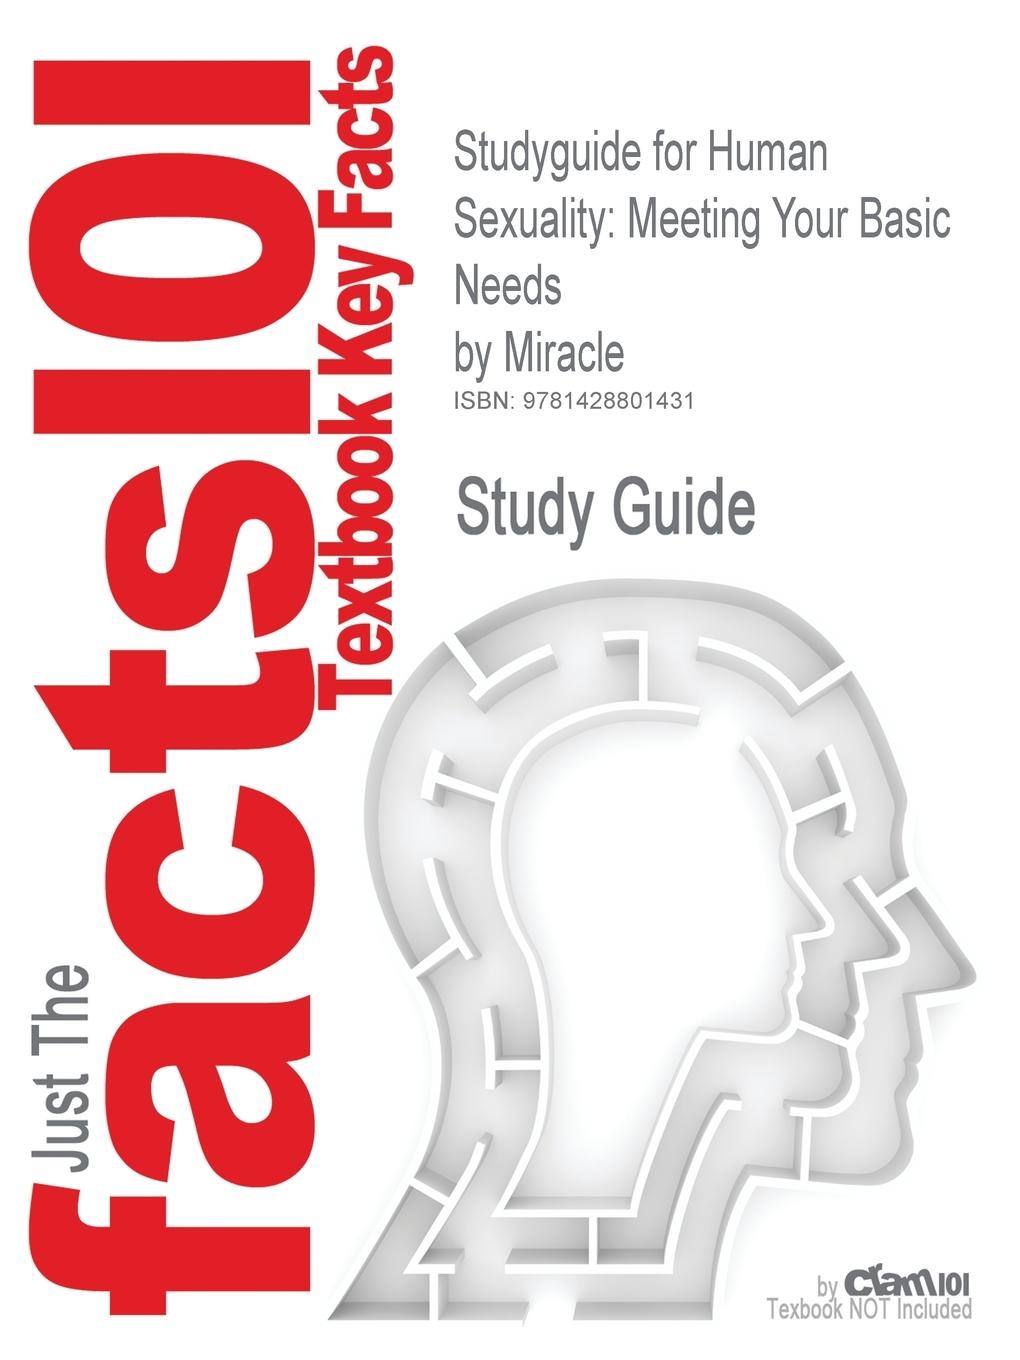 Studyguide for Human Sexuality - Cram101 Textbook Reviews